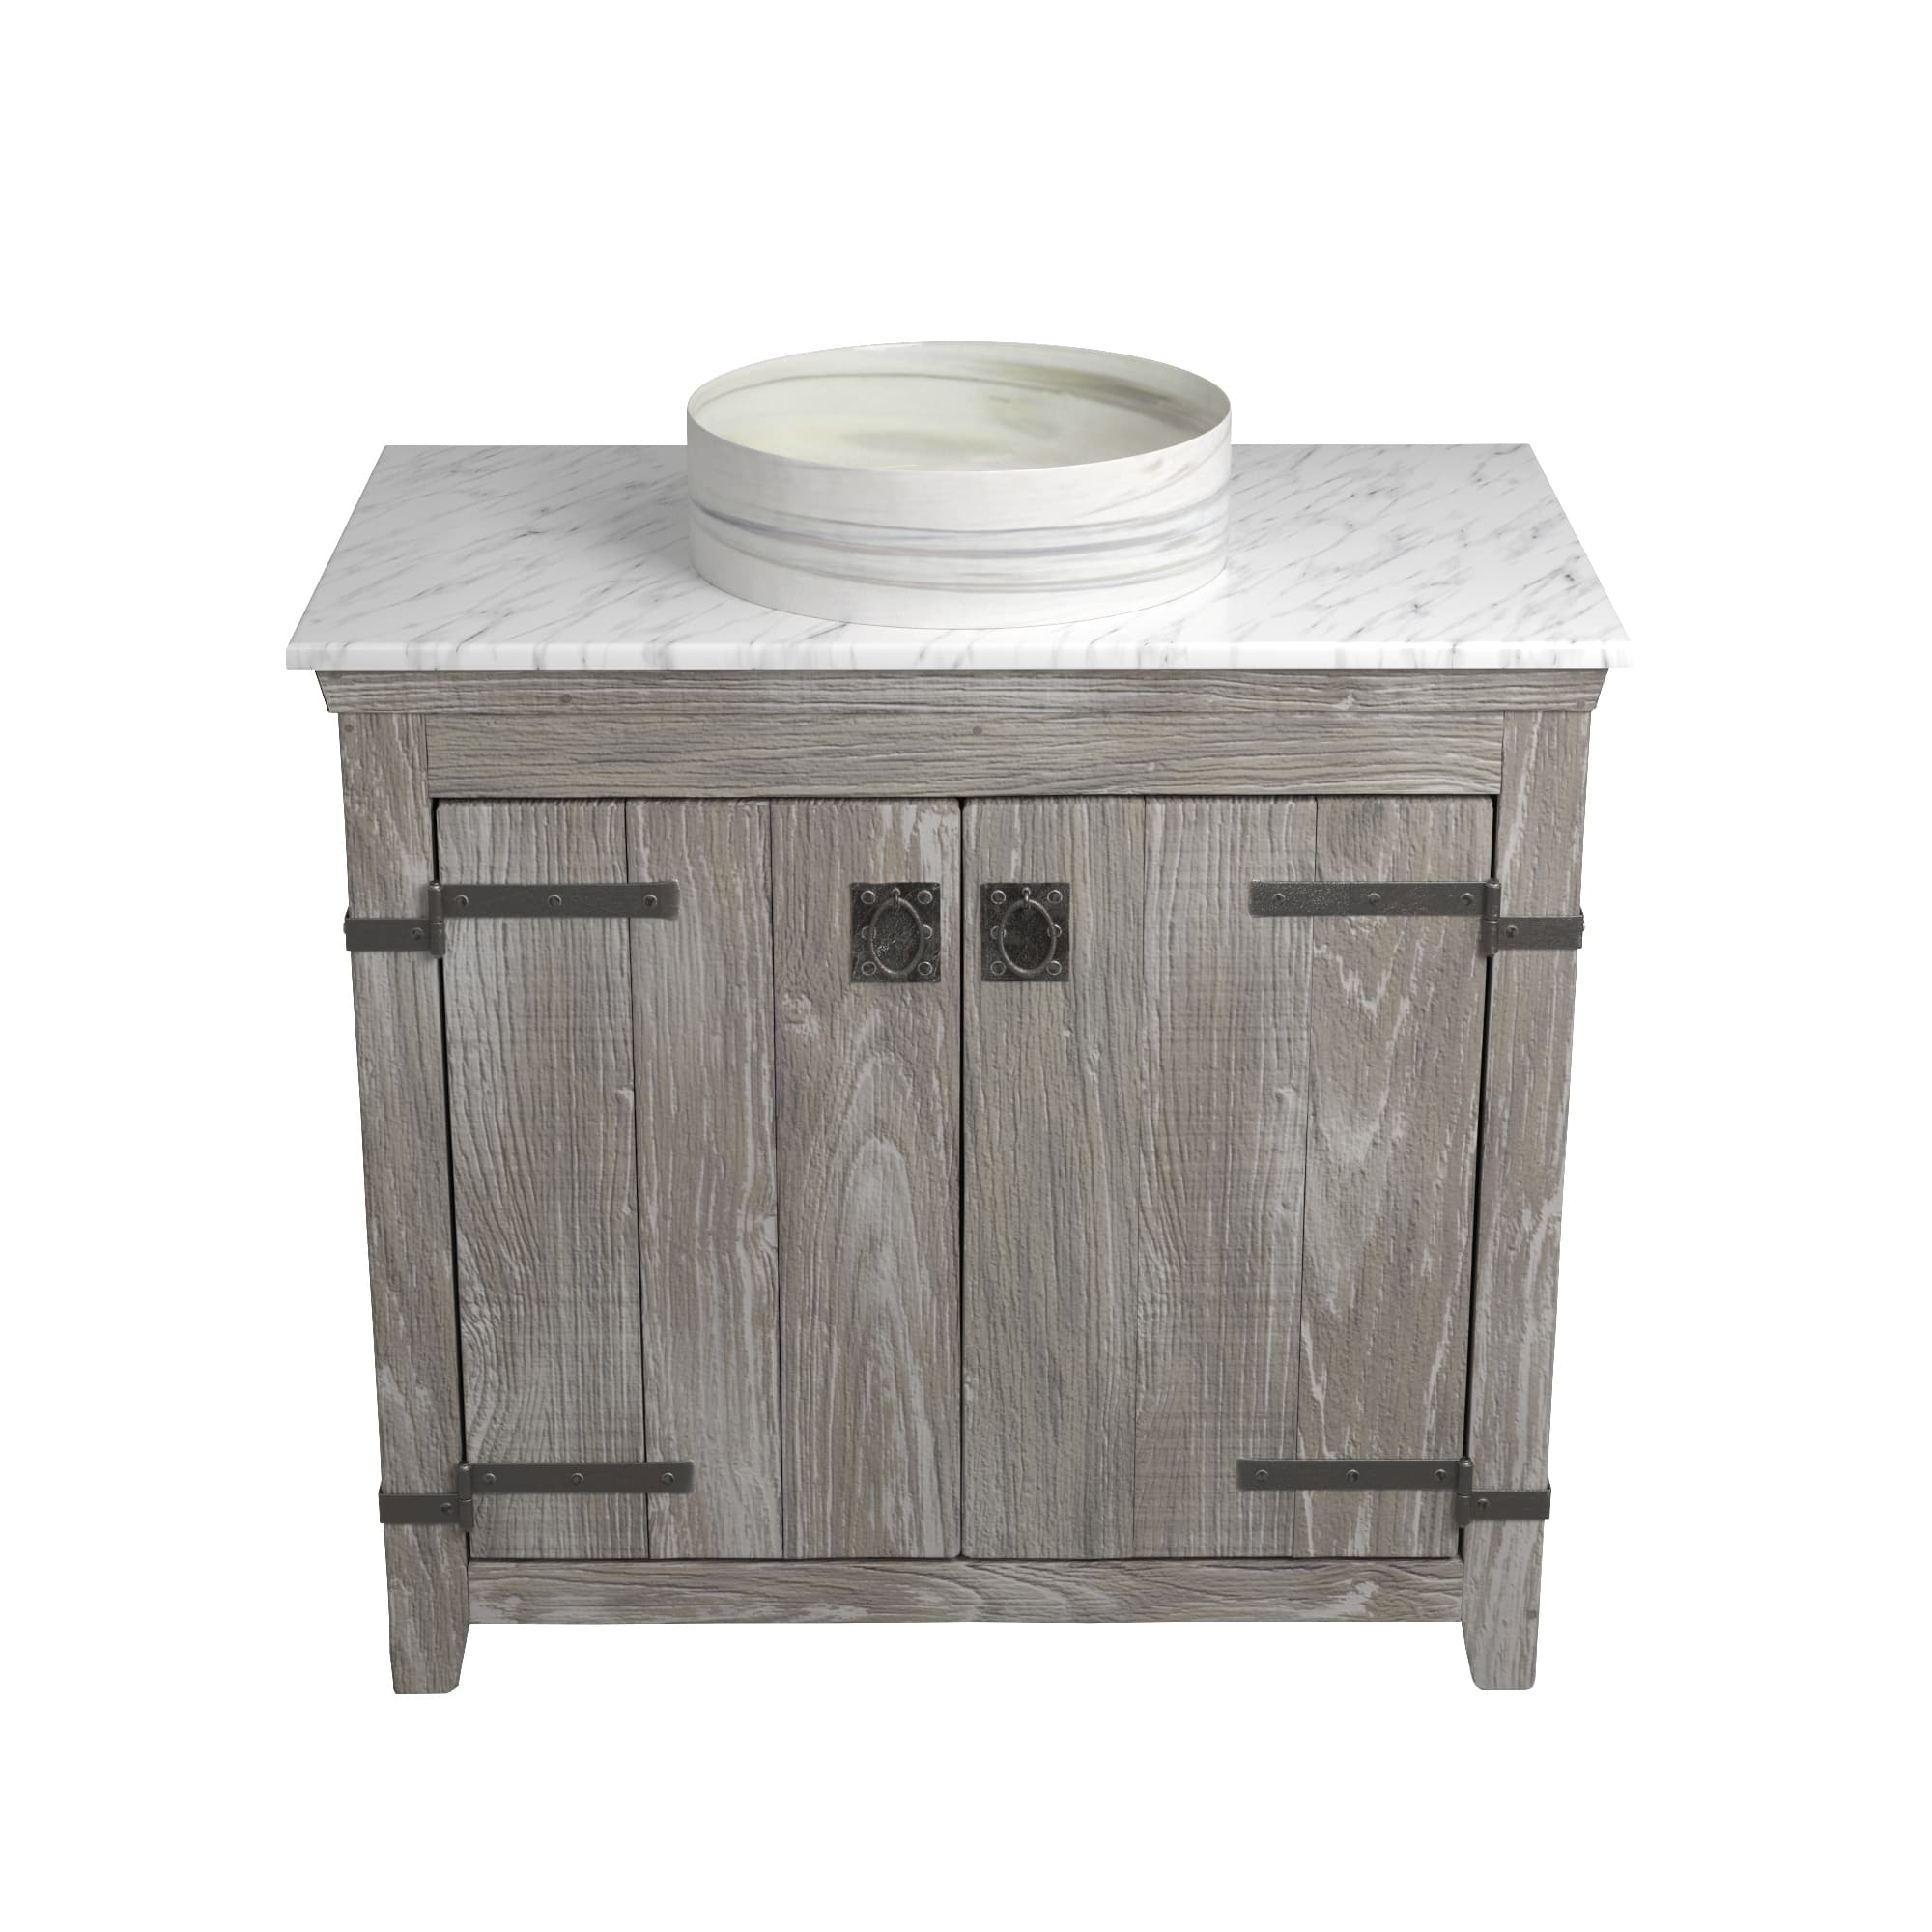 Native Trails 36" Americana Vanity in Driftwood with Carrara Marble Top and Positano in Abalone, No Faucet Hole, BND36-VB-CT-MG-040